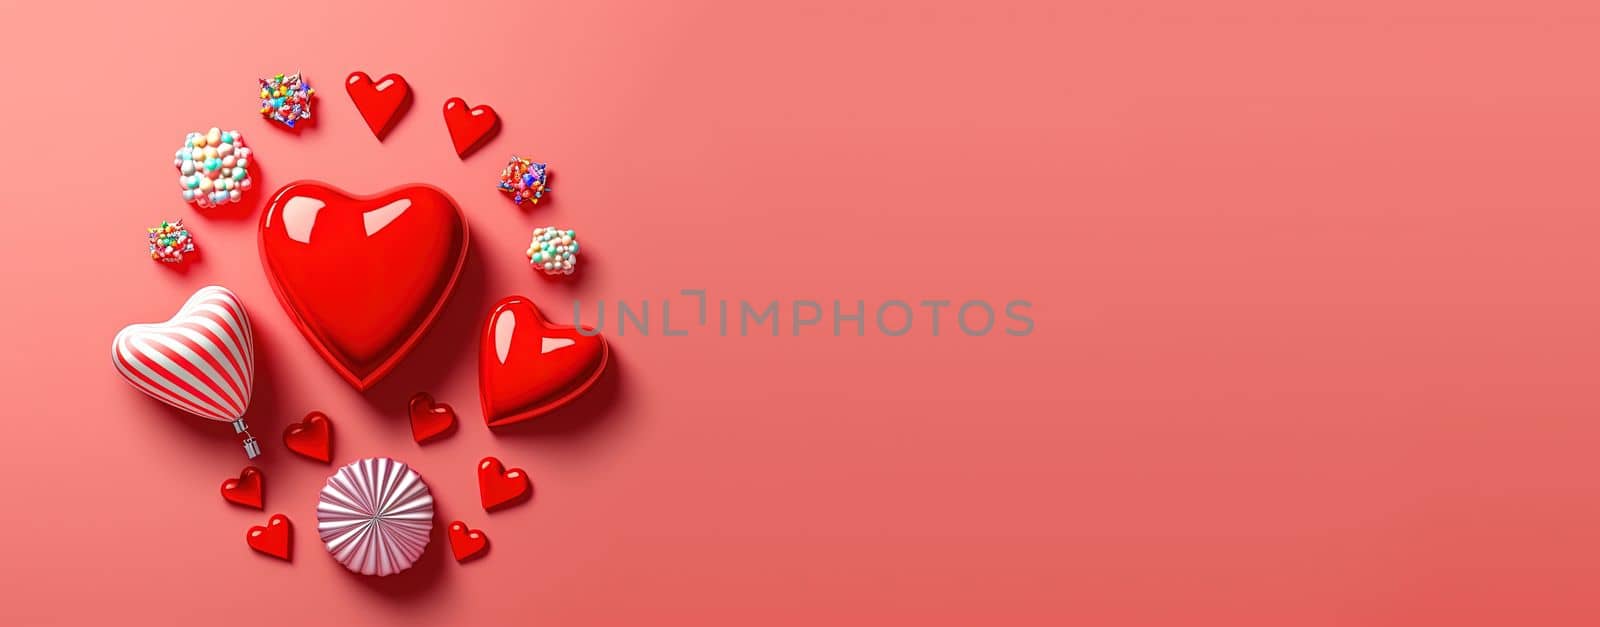 Valentine's Day banner with a striking red 3D heart shape